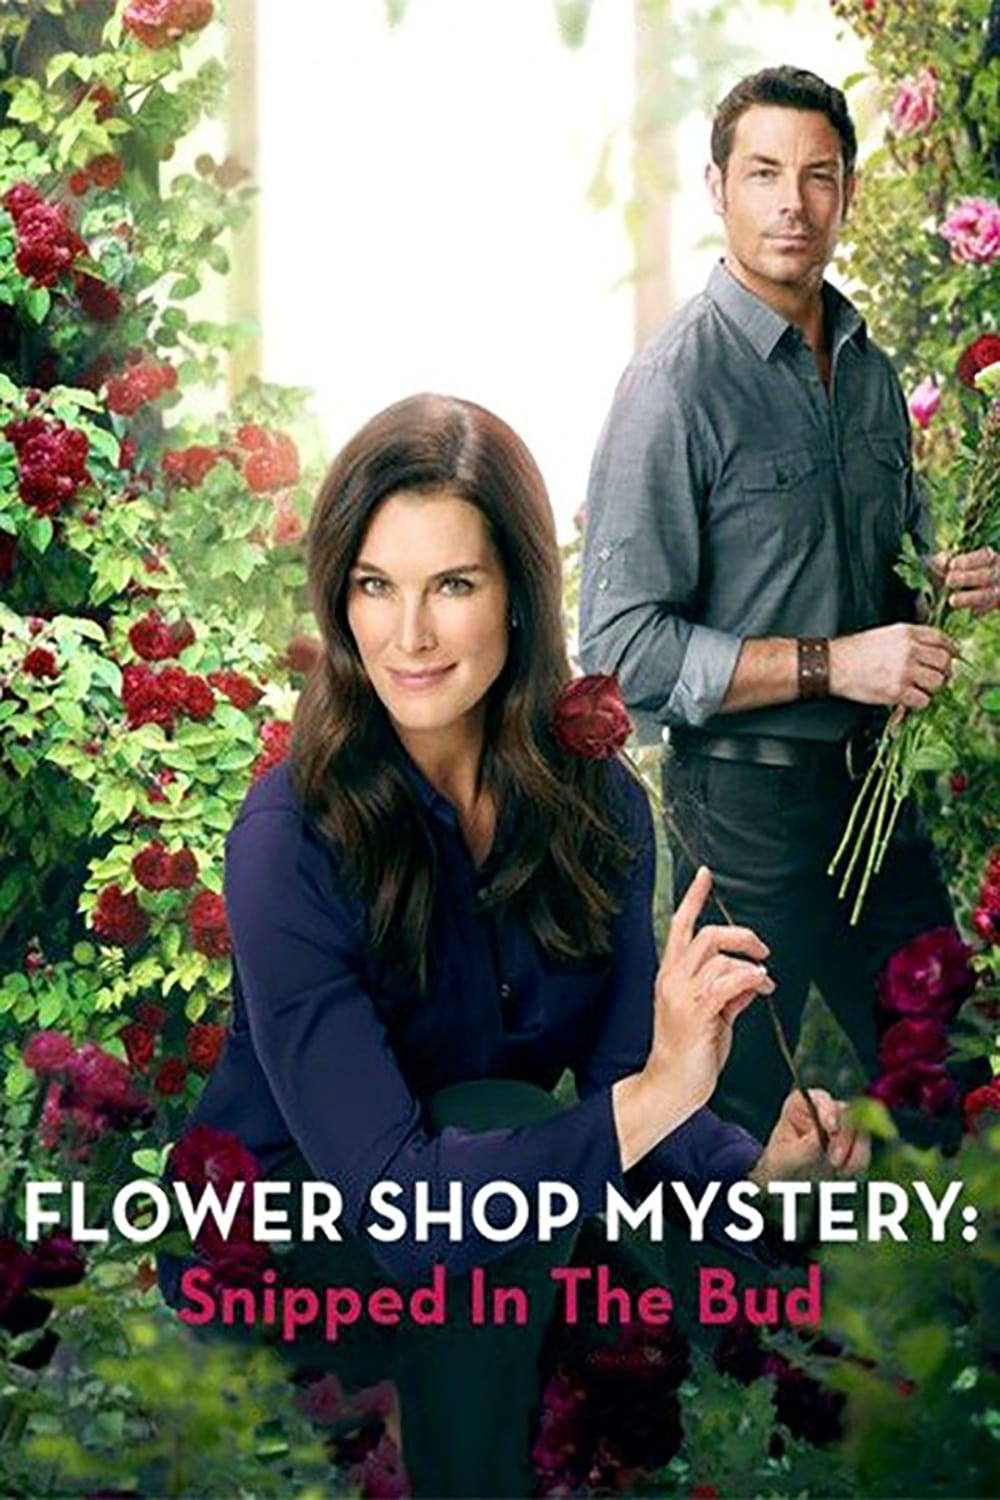 Flower Shop Mystery: Snipped in the Bud (2016)